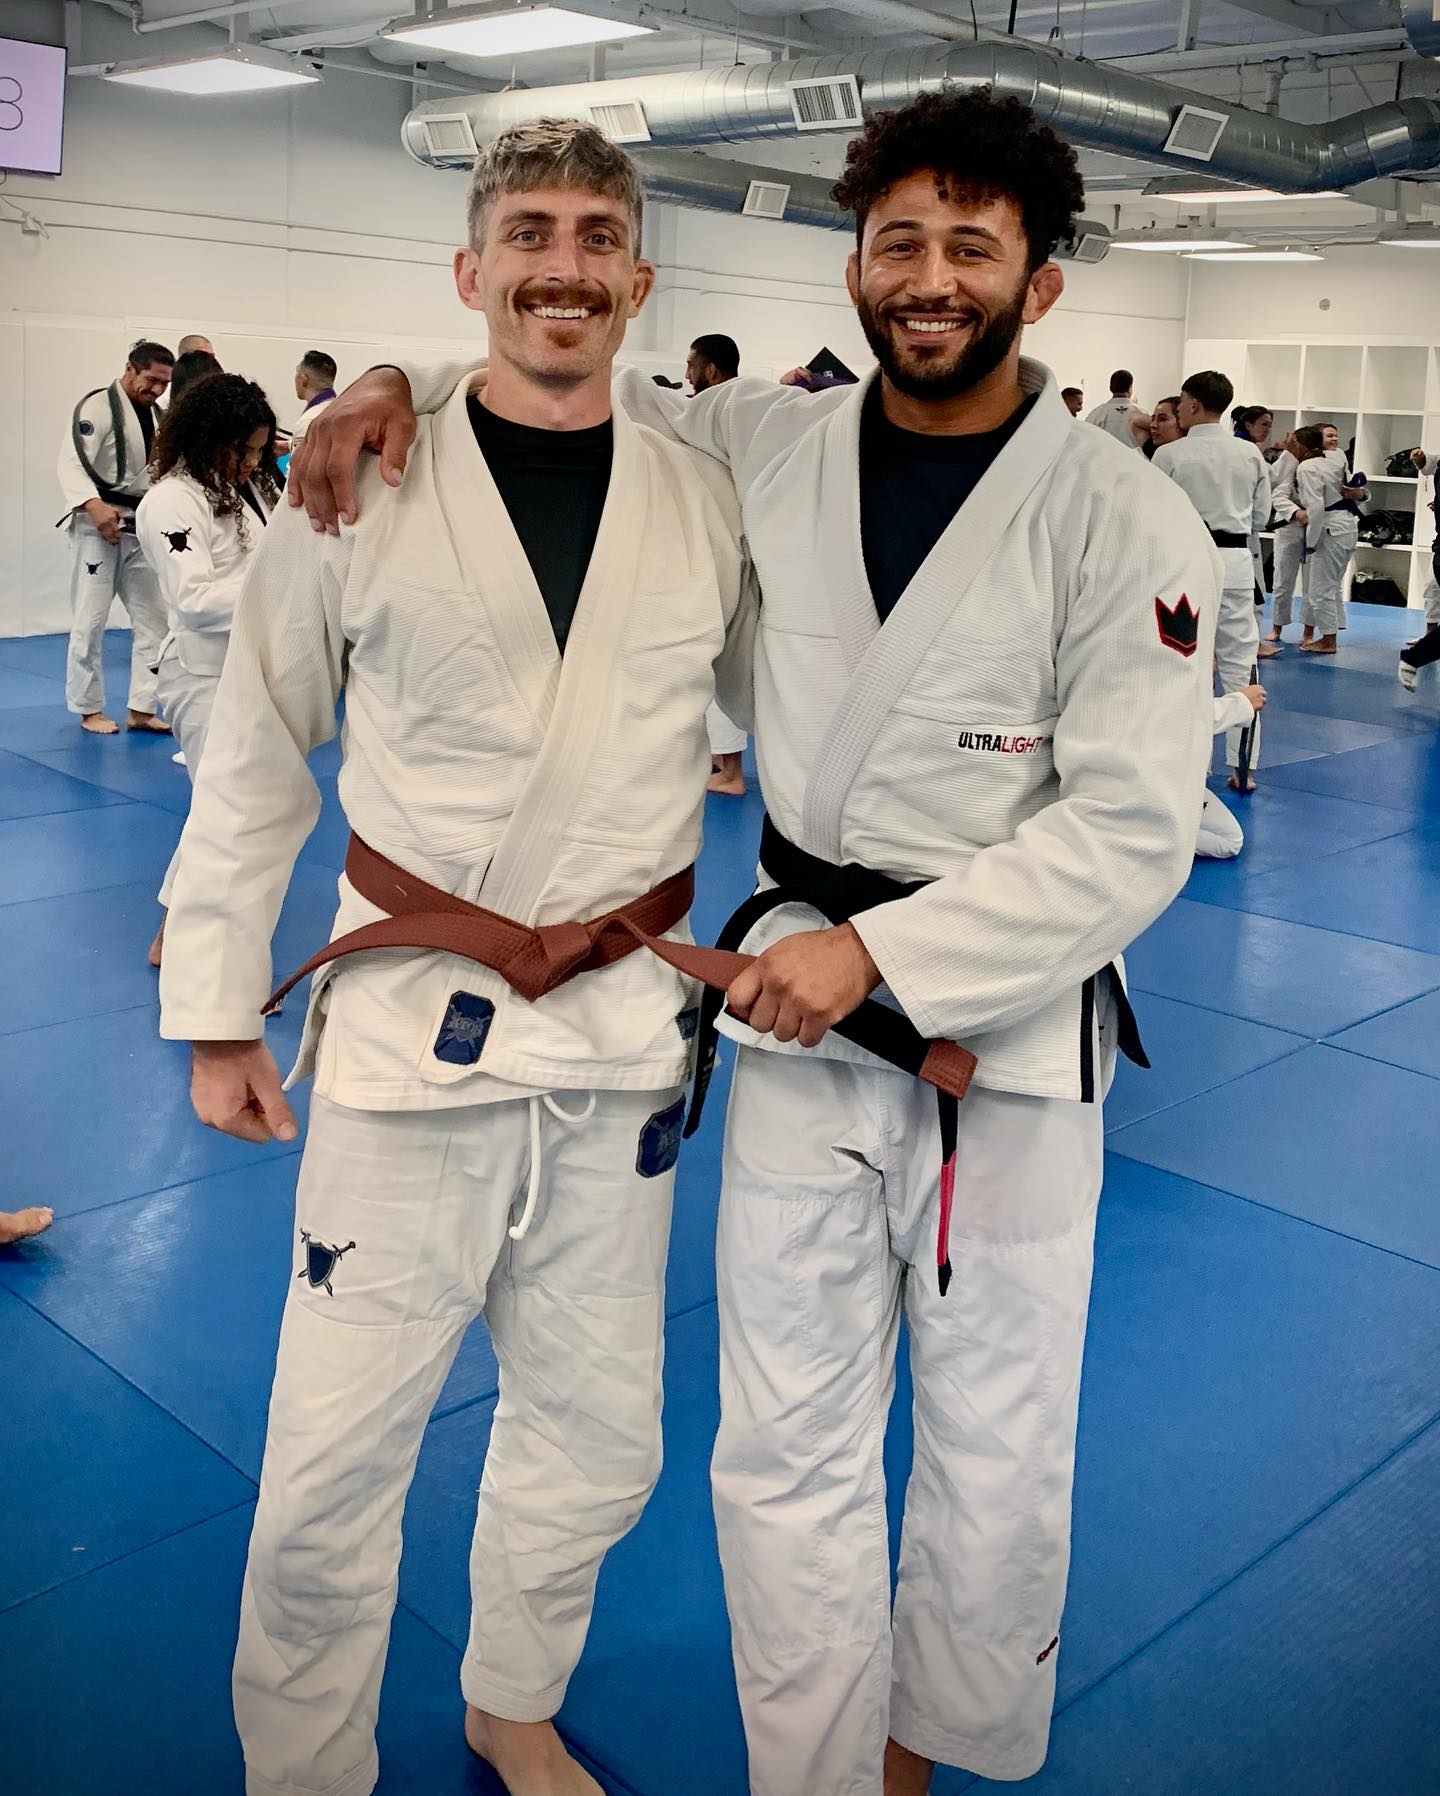 I earned my brown belt in BJJ from the prestigious @atosjiujitsuhq 

Thank you to Professor @galvaobjj for trusting me to represent Atos as a brown belt. It is a great honor to receive this promotion from you. A true legend , the 🐐

Thank you to professors @rolando_samson @jonnatas_gracie @andymurasaki @trovobjj  @dubious_dom & to all the students of the 9am & noon classes. 

Special thanks to my students , coworkers & bosses @oceanpacificgym it’s amazing to be able to coach and share my passion for Jiu jitsu at such an incredible place. 

And thanks to @vincelapelusa, @tommygmcgee for always talking jj with me. 

Thanks to @callieforniagirl999 for believing in me, the support and continued love. 

I am Thankful for my body, the ability to train and learn and grow. Time to begin again. 🤎